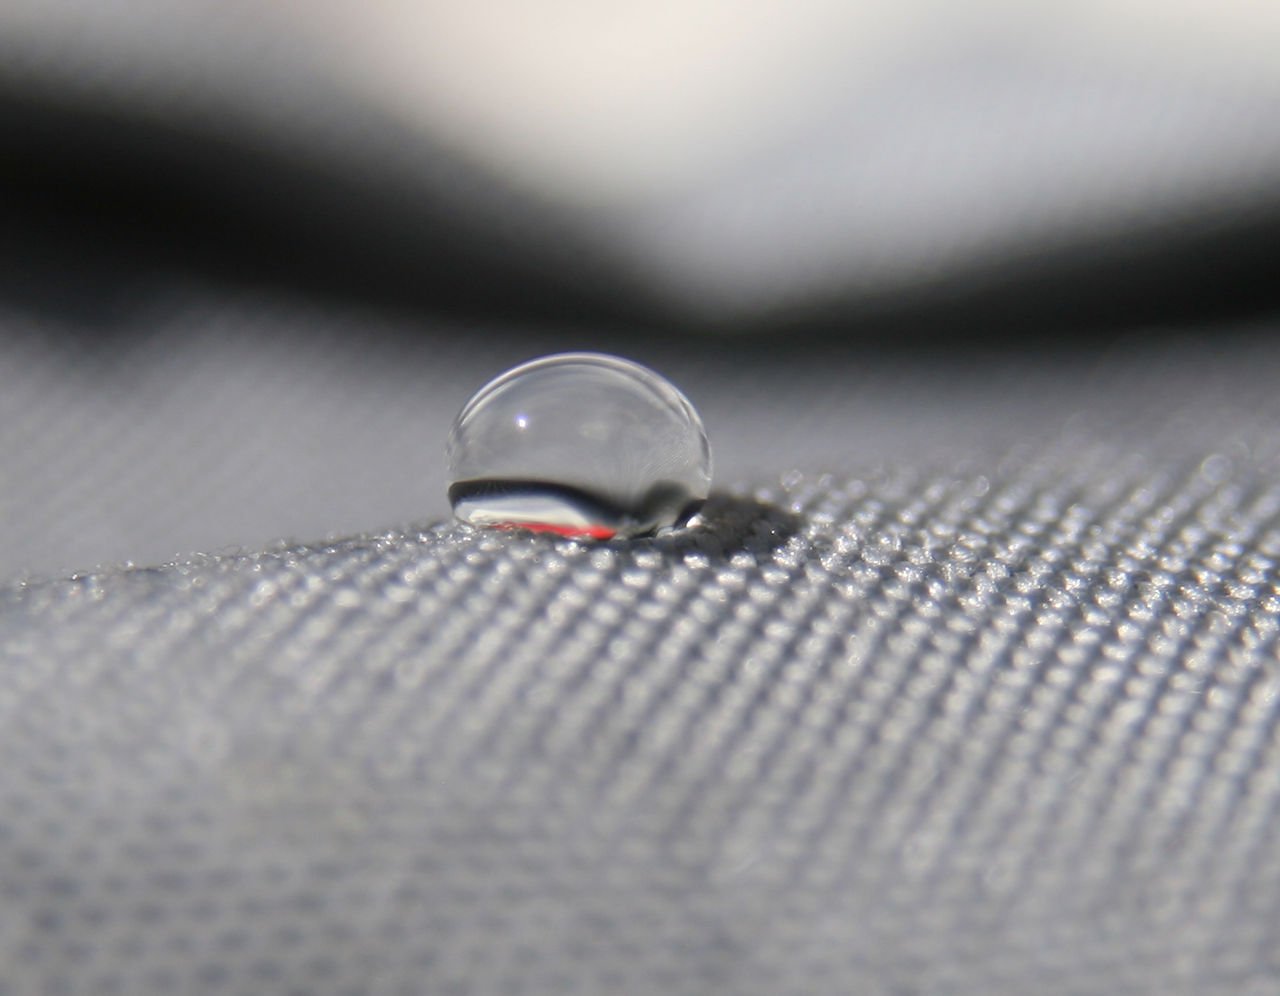 close up of a droplet of water on a gray mesh surface